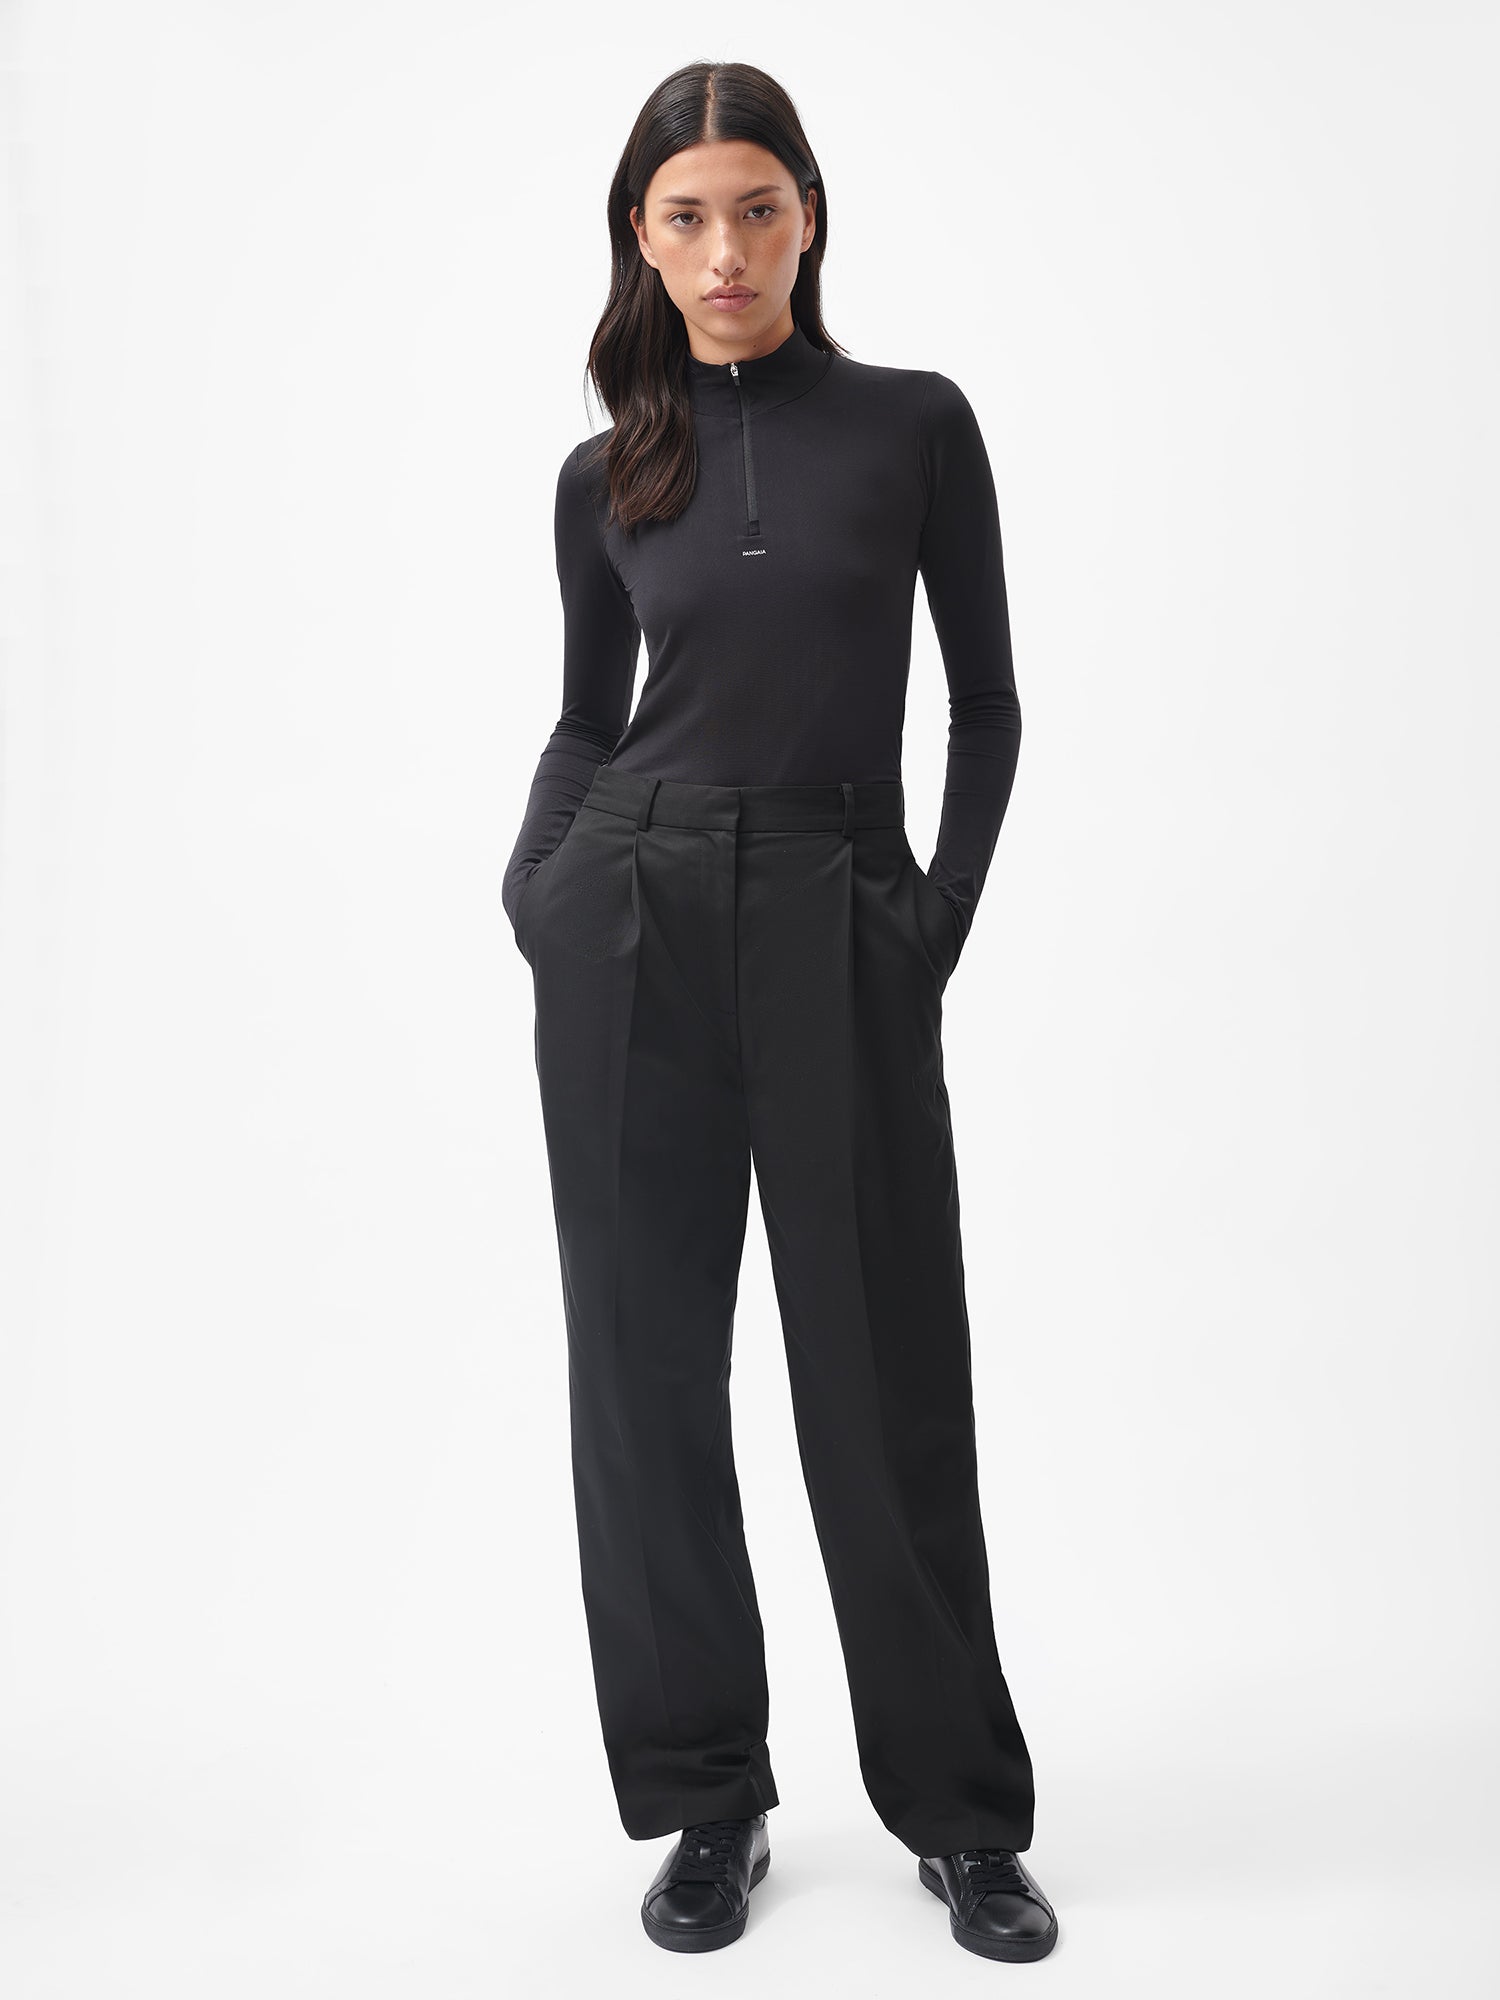 Polyester Blend Solid Women's Trousers Black Pants (38Inches)